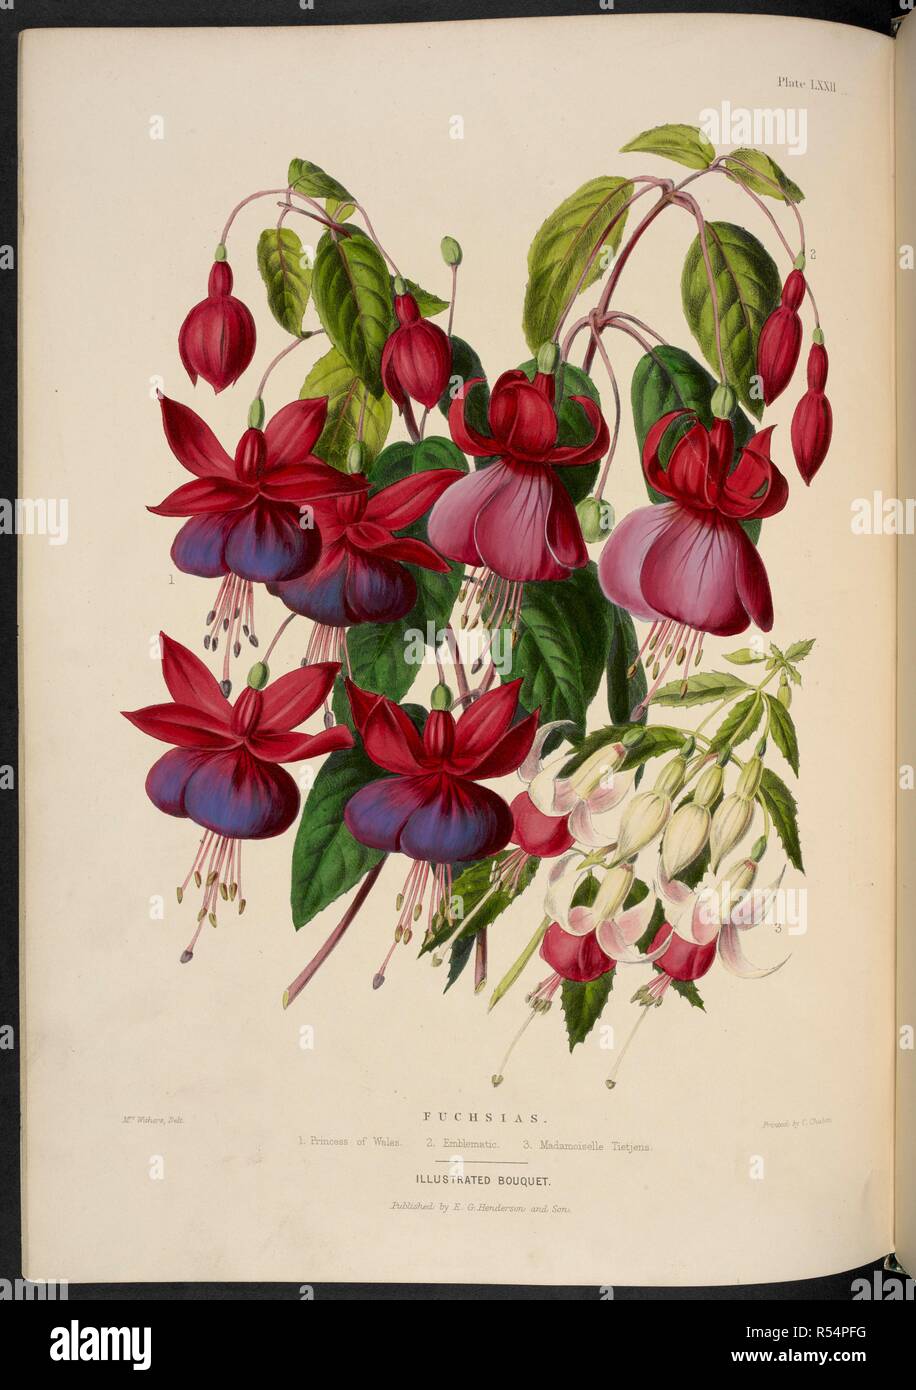 New Fuchsias. Fuchsias. 1. Princess of Wales; 2. Emblematic; 3. Madamoiselle [sic] Tietjens. The Illustrated Bouquet, consisting of figures, with descriptions of new flowers. London, 1857-64. Source: 1823.c.13 plate 72. Author: Henderson, Edward George. Withers, Mrs. Stock Photo